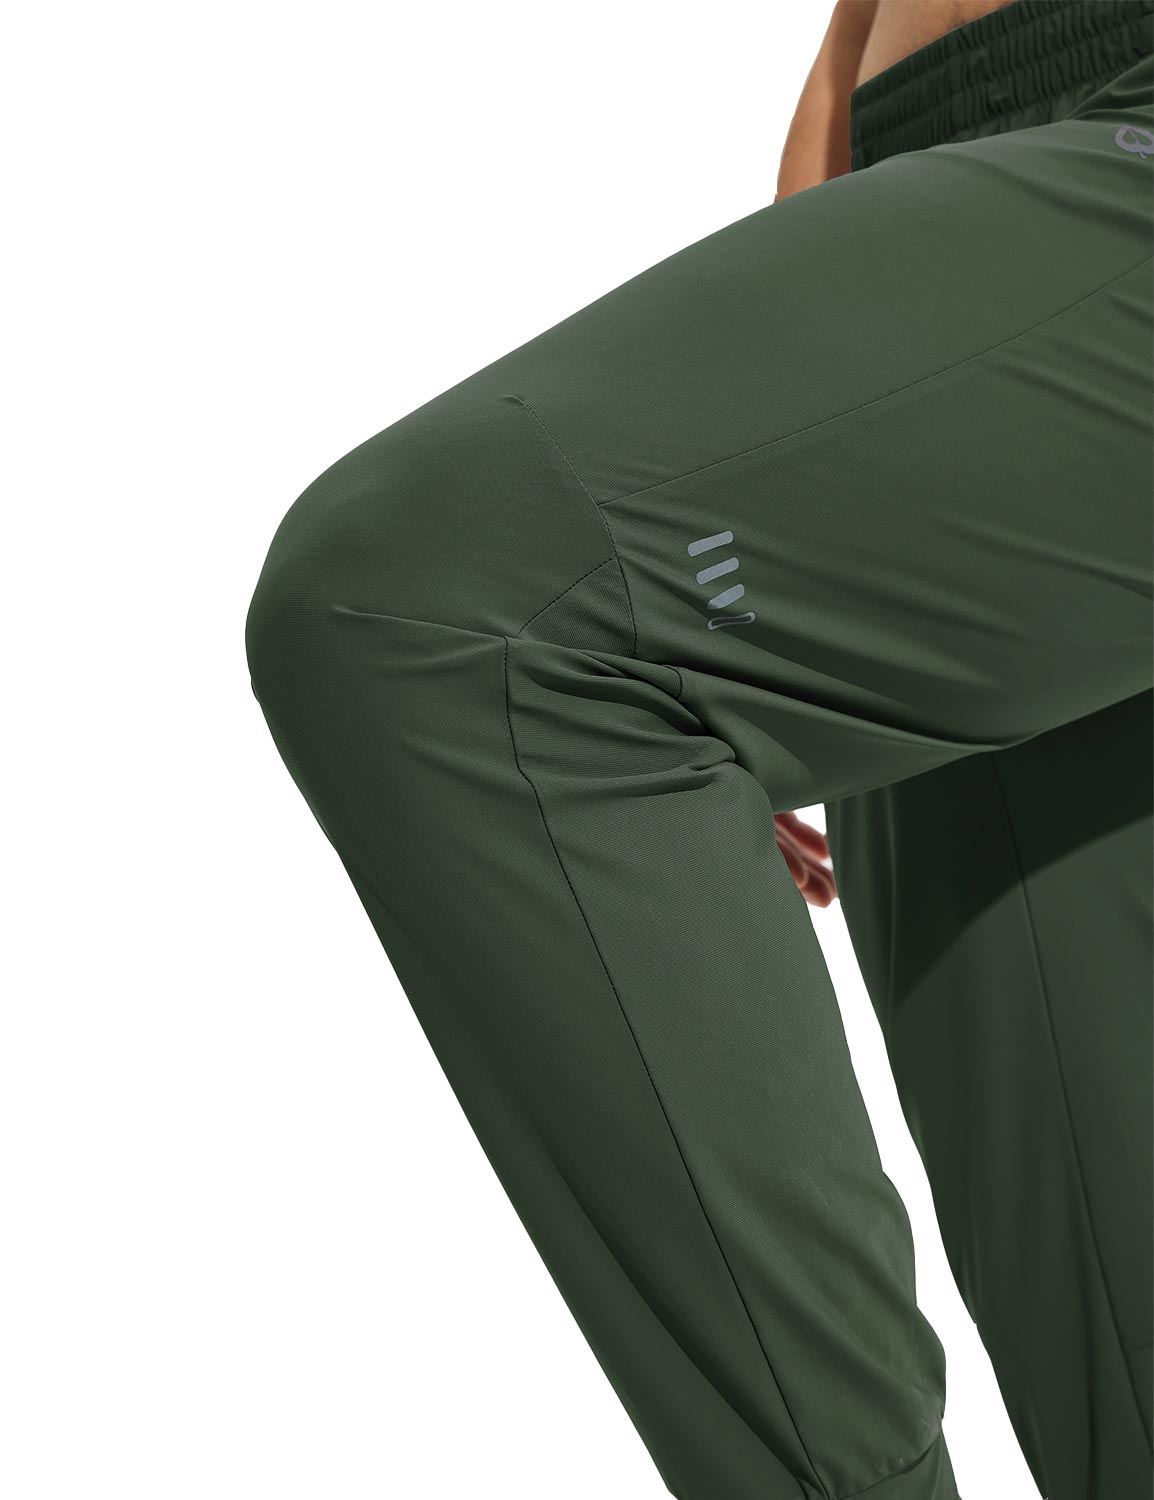 Baleaf Men's High-Stretchy Quick-Dry Joggers Pants Rifle Green Details